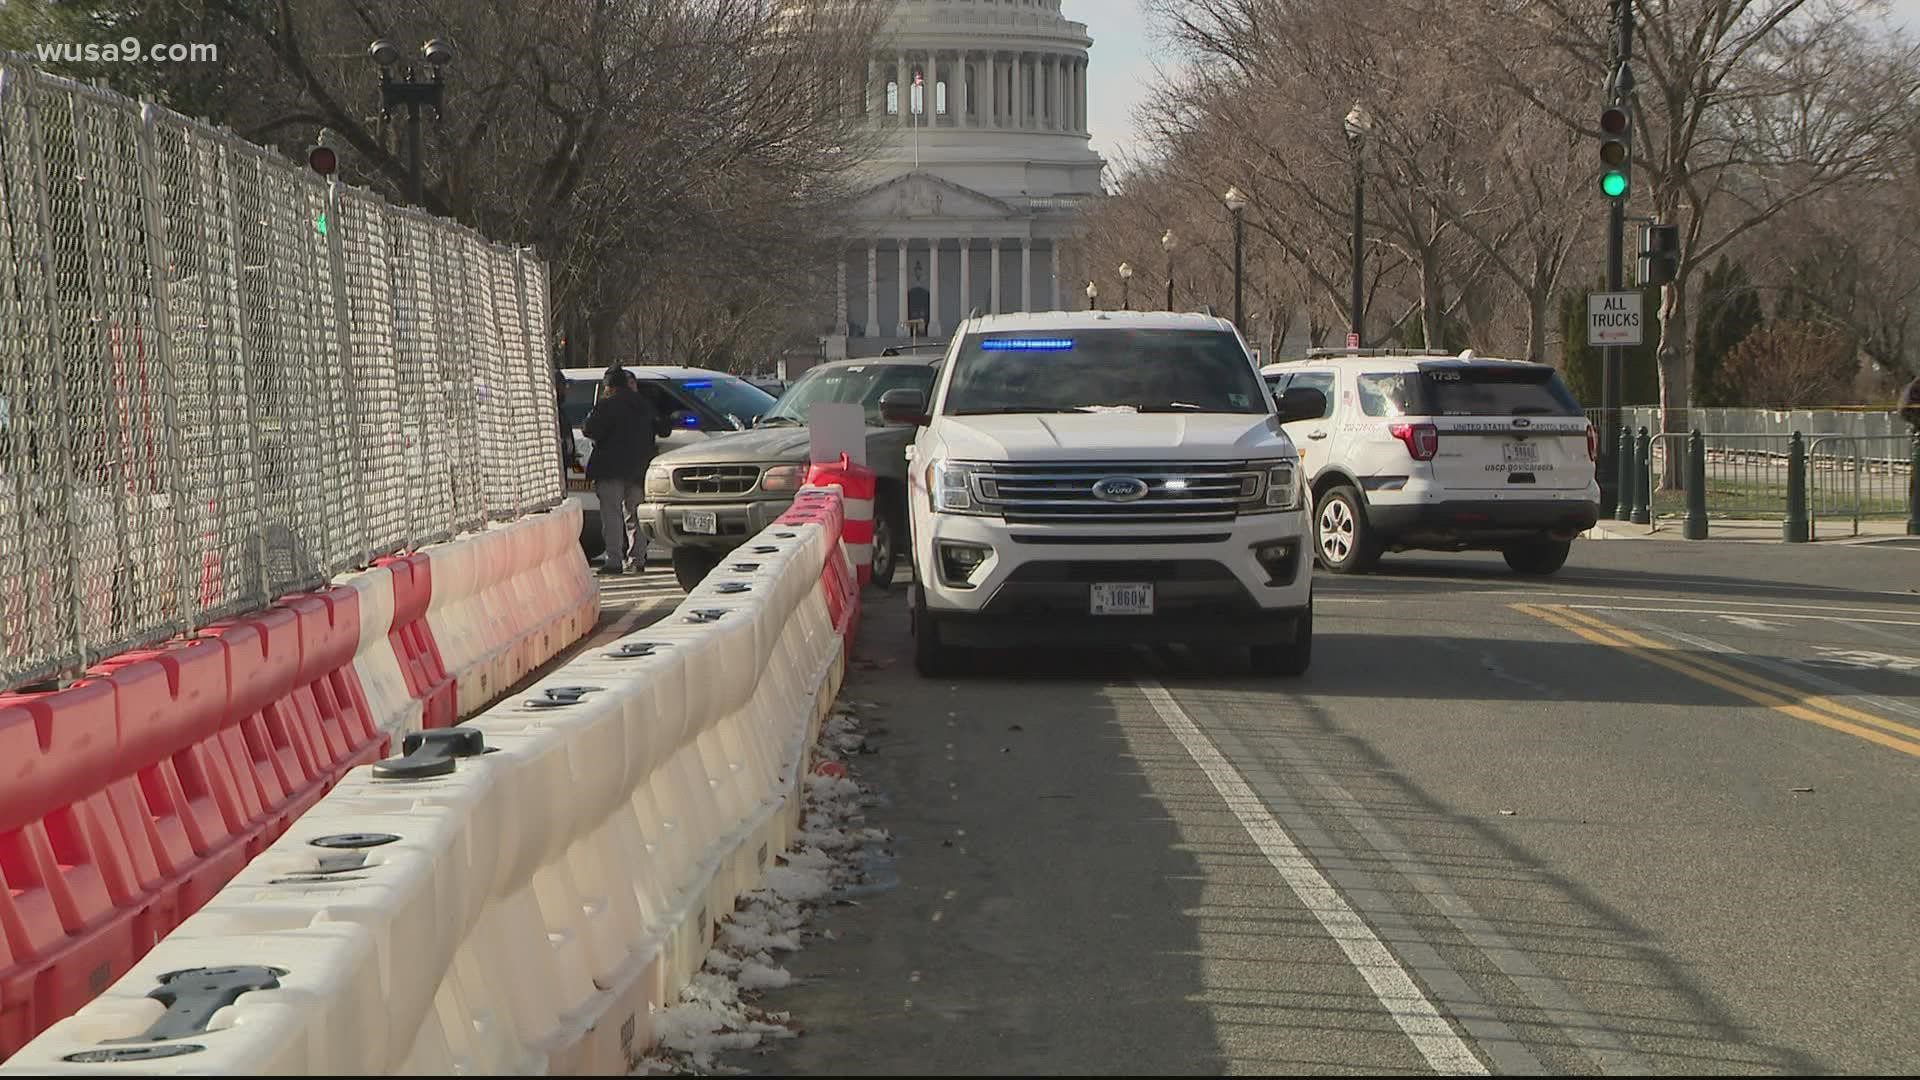 Police say that Ford Explorer was also involved in an armed carjacking previously in D.C.